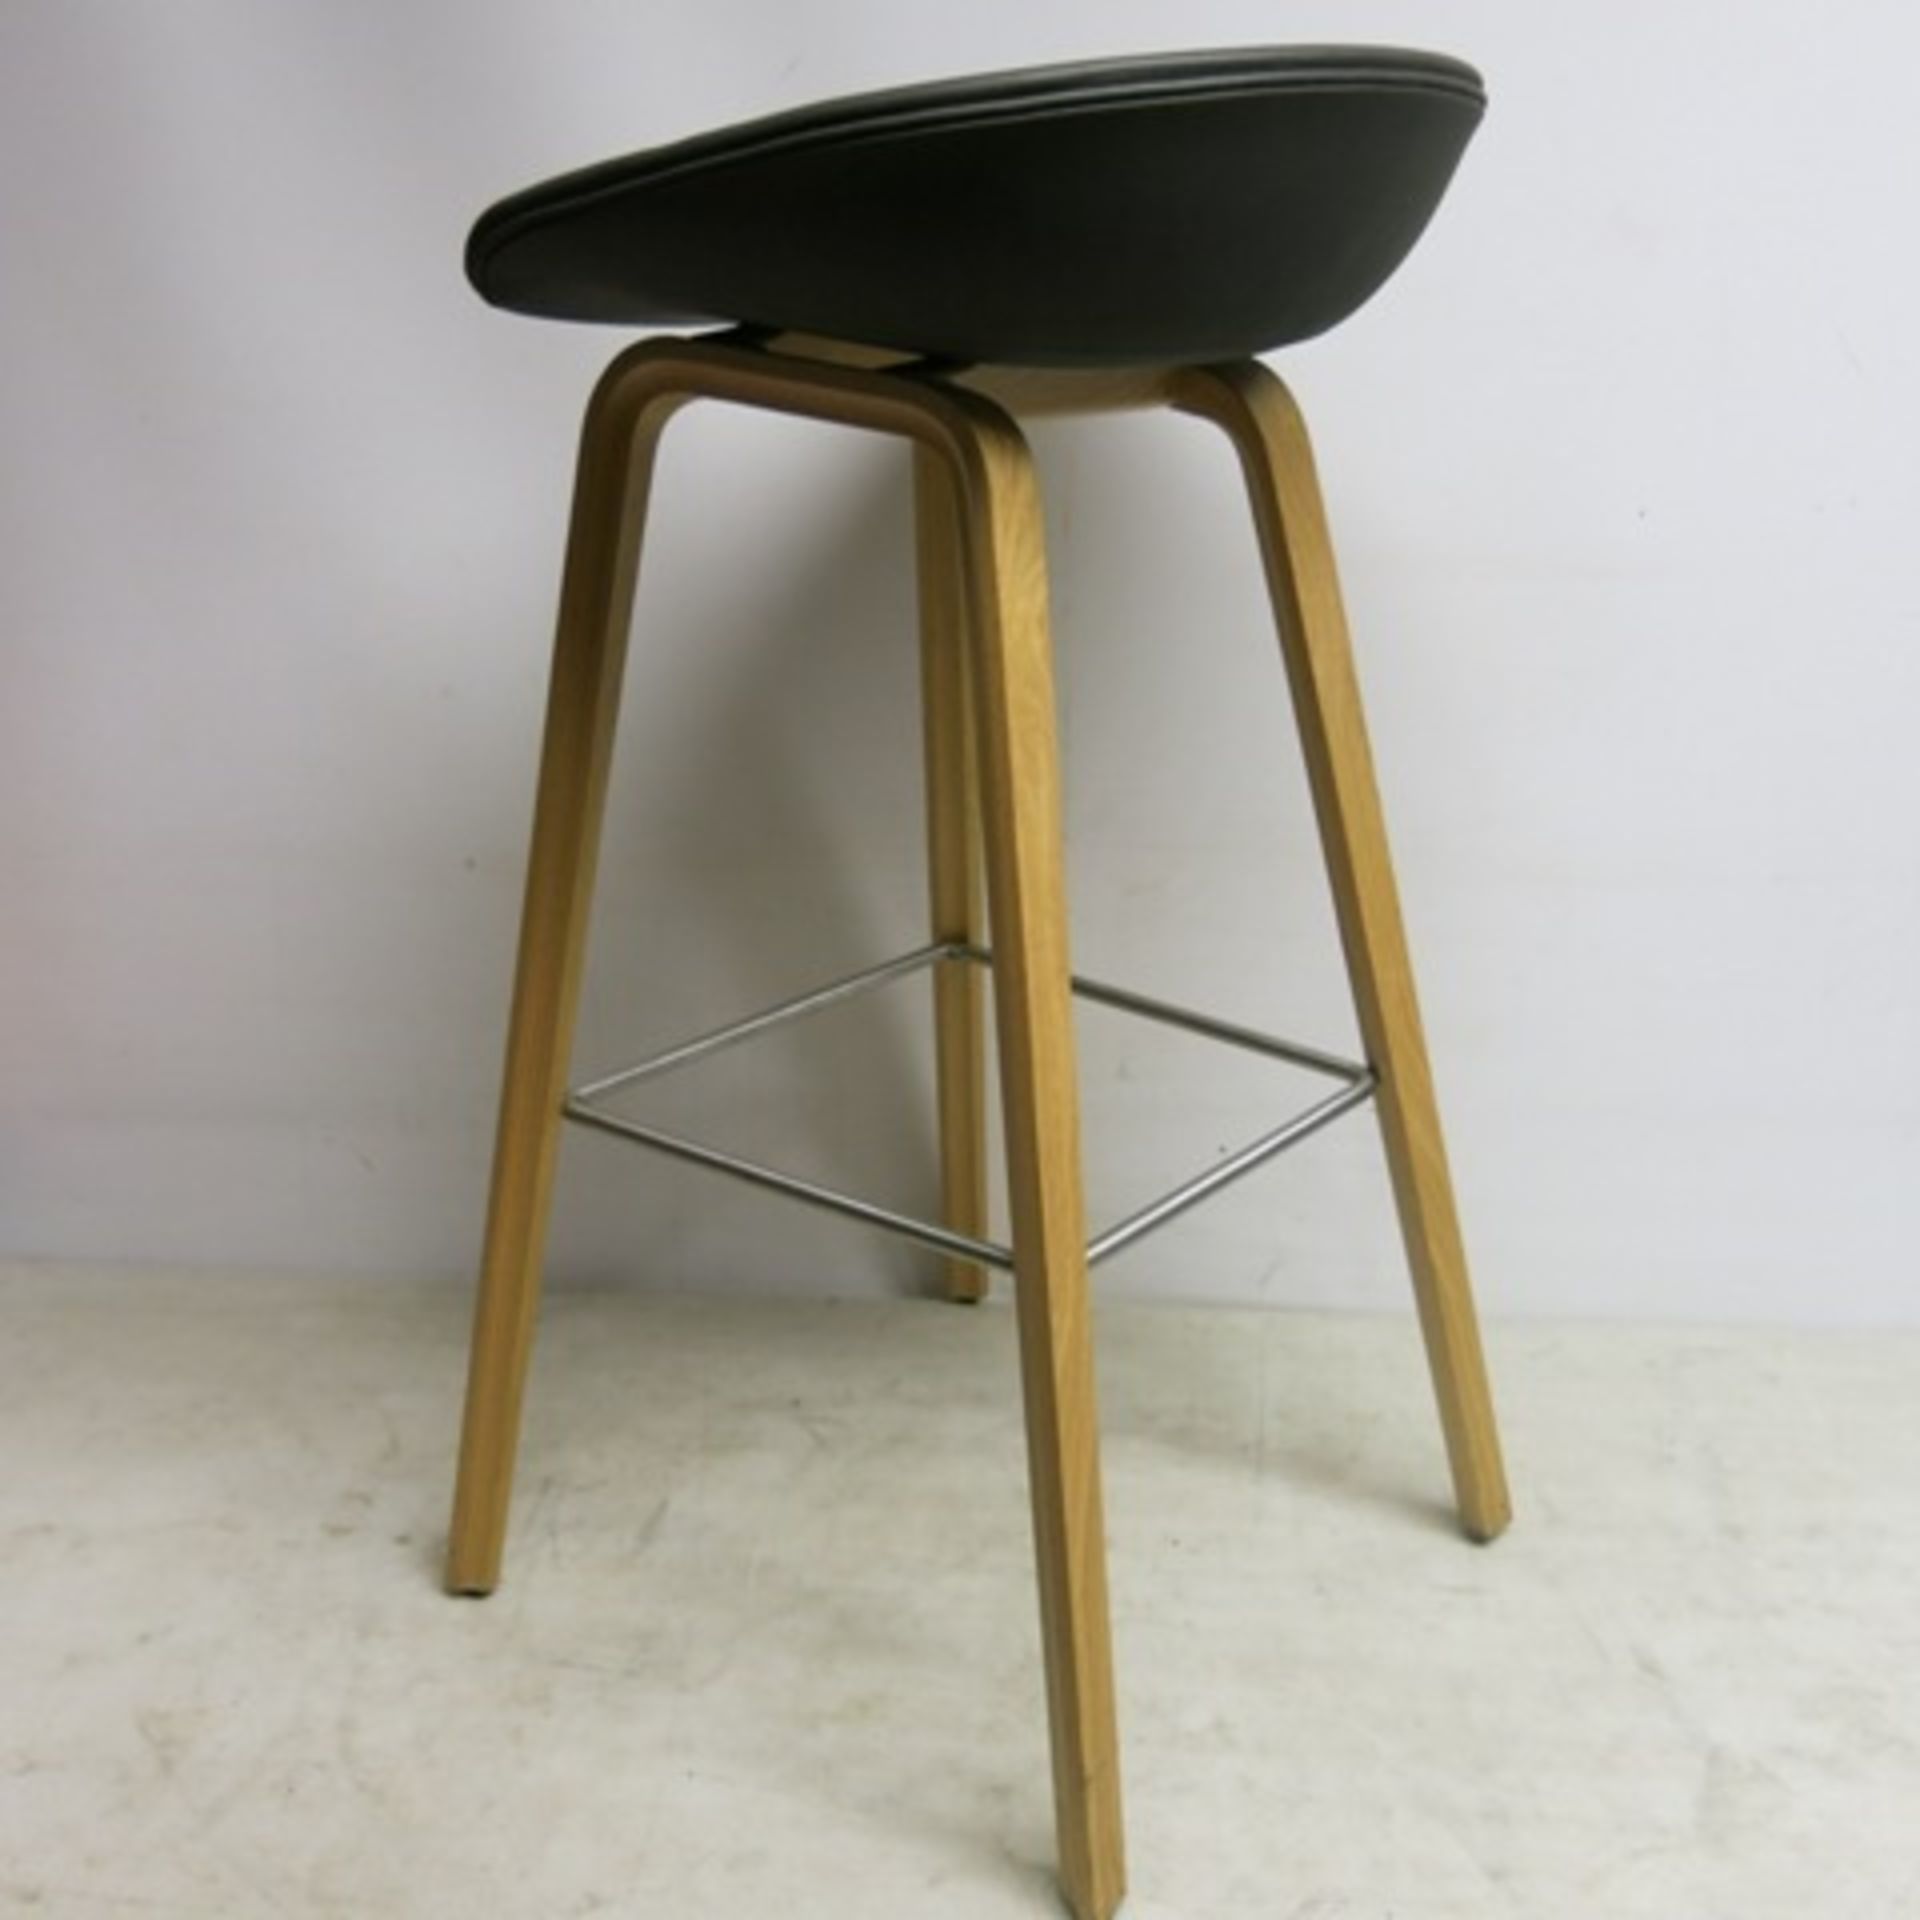 Designer 'Hay' About A Stool Model AAS32 High Stool in Matt Lacquered Oak & Charcoal Grey Padded - Image 3 of 5